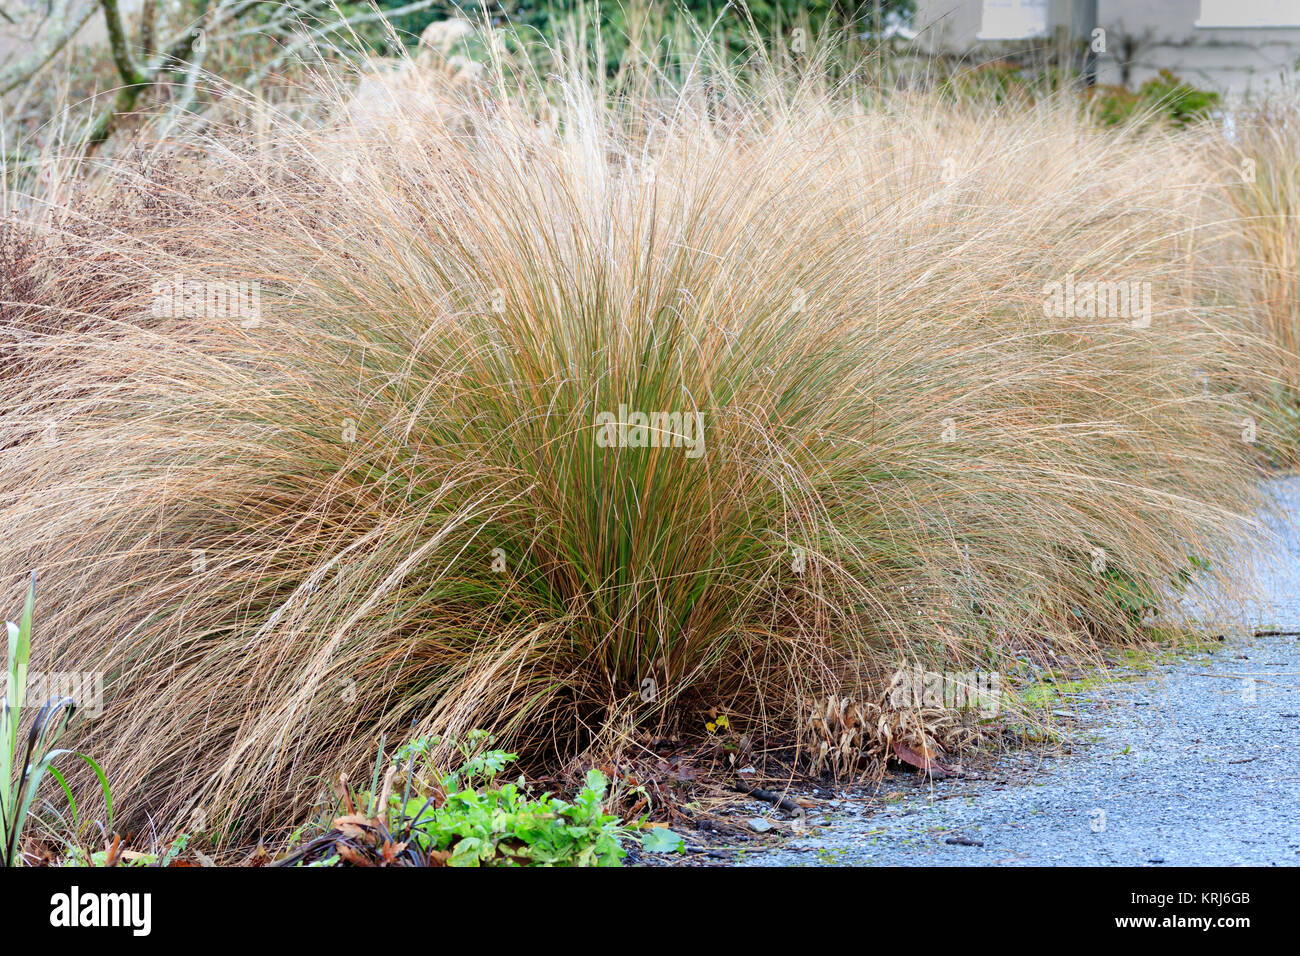 Arching stems form a semi circular mound of the red tussock grass, Chionochloa rubra Stock Photo